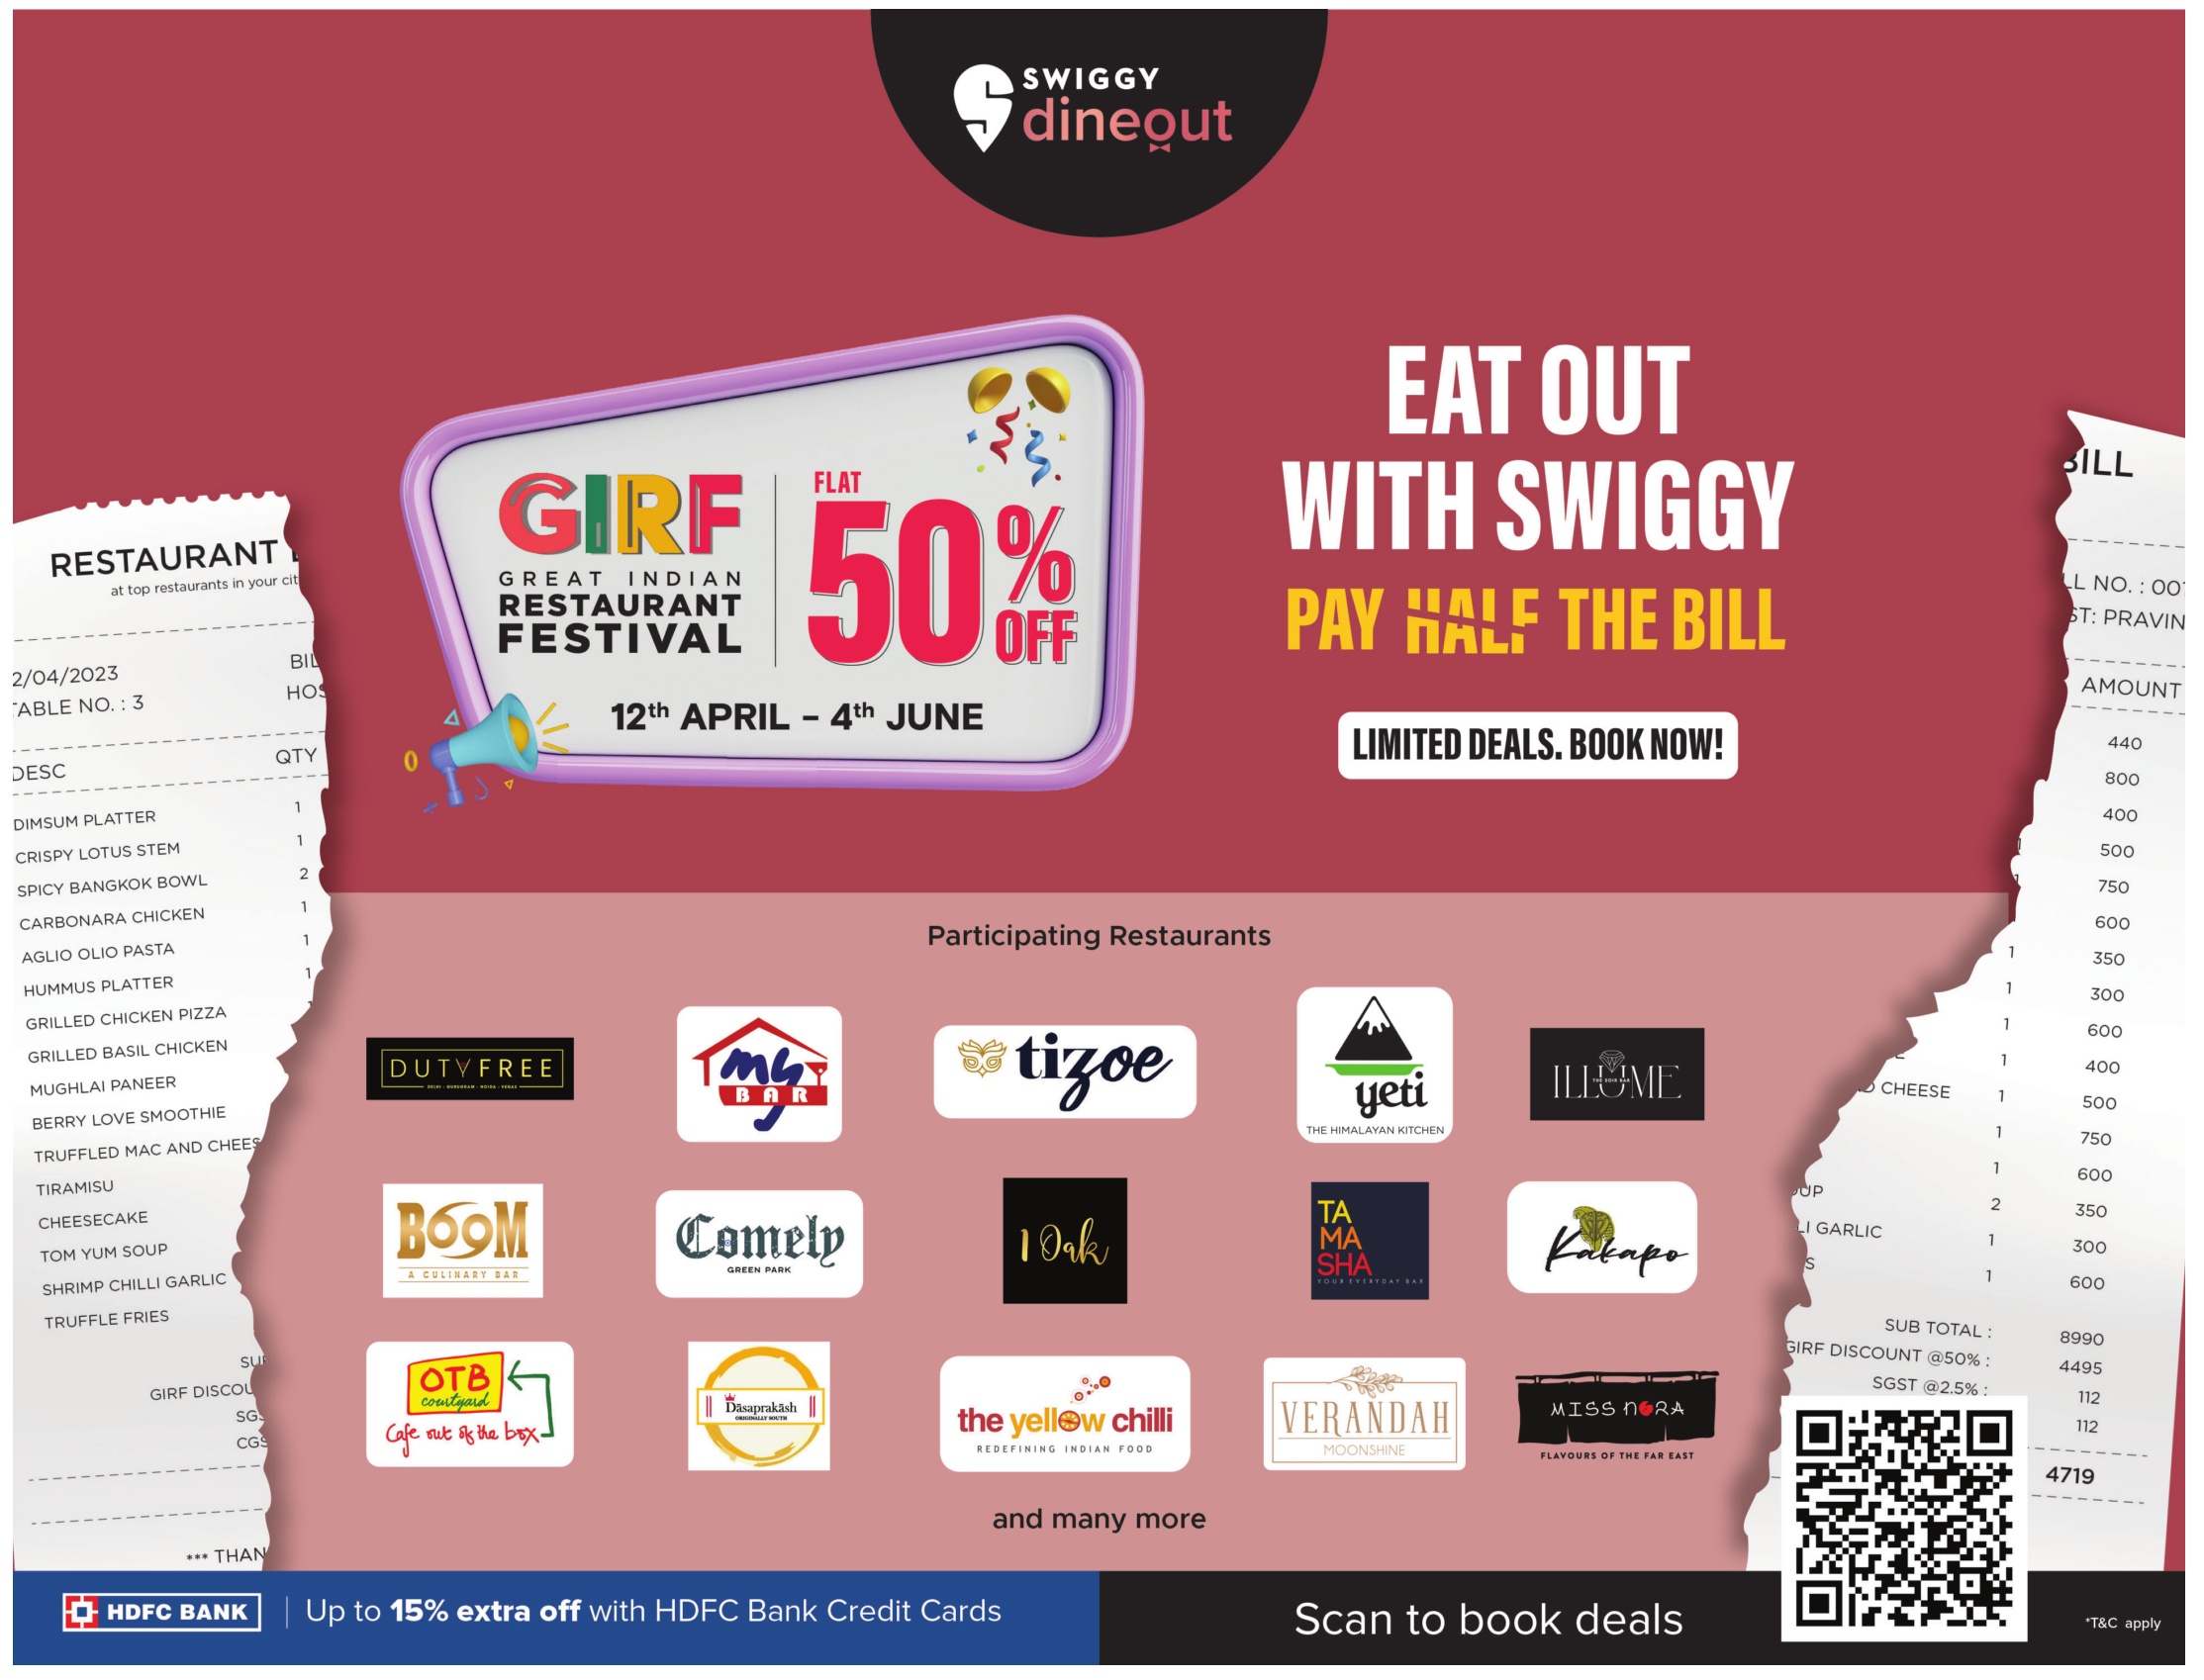 Swiggy-dineout-great-Indian-restaurant-festival-flat-50%-off-12th-april-to-4th-april-flat-50%-off-eat-out-with-swiggy-pay-half-the-bill-ad-times-of-india-Delhi-05-05-2023.jpg